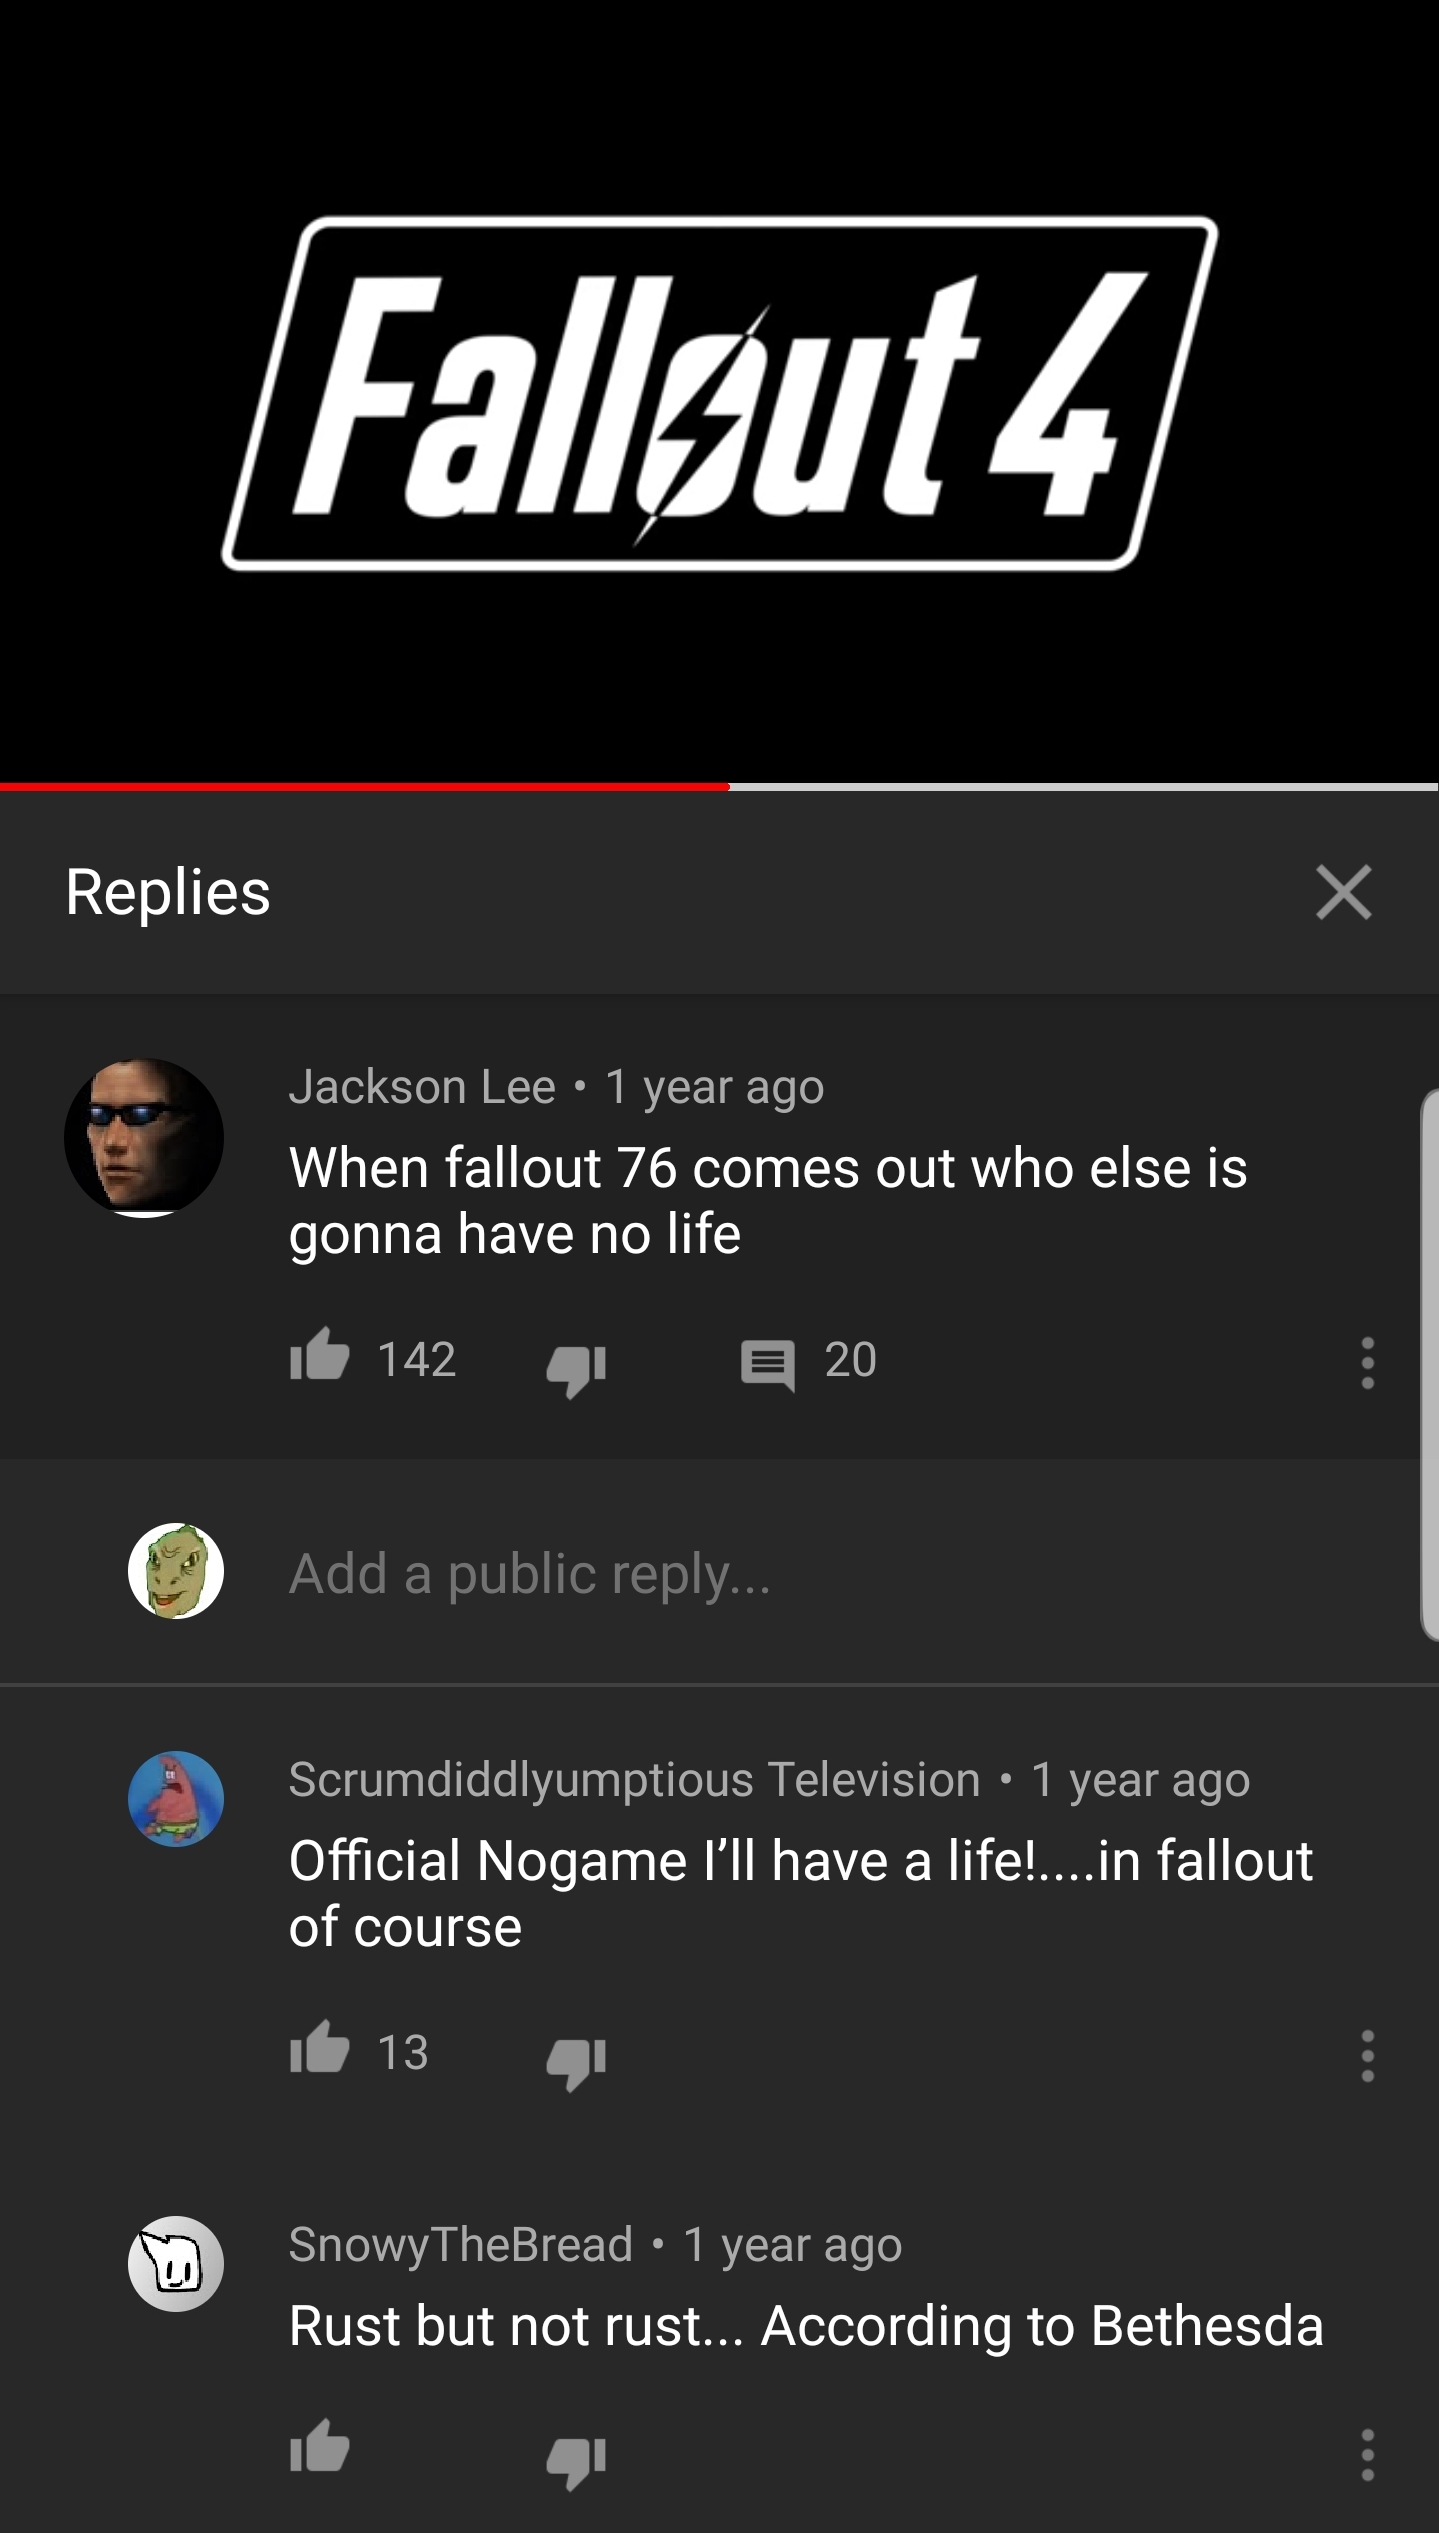 fallout 4 - Fallout 4 Replies Jackson Lee 1 year ago When fallout 76 comes out who else is gonna have no life 16 142 21 20 Add a public ... Scrumdiddlyumptious Television 1 year ago Official Nogame I'll have a life!....in fallout of course it 13 4 Snowy T